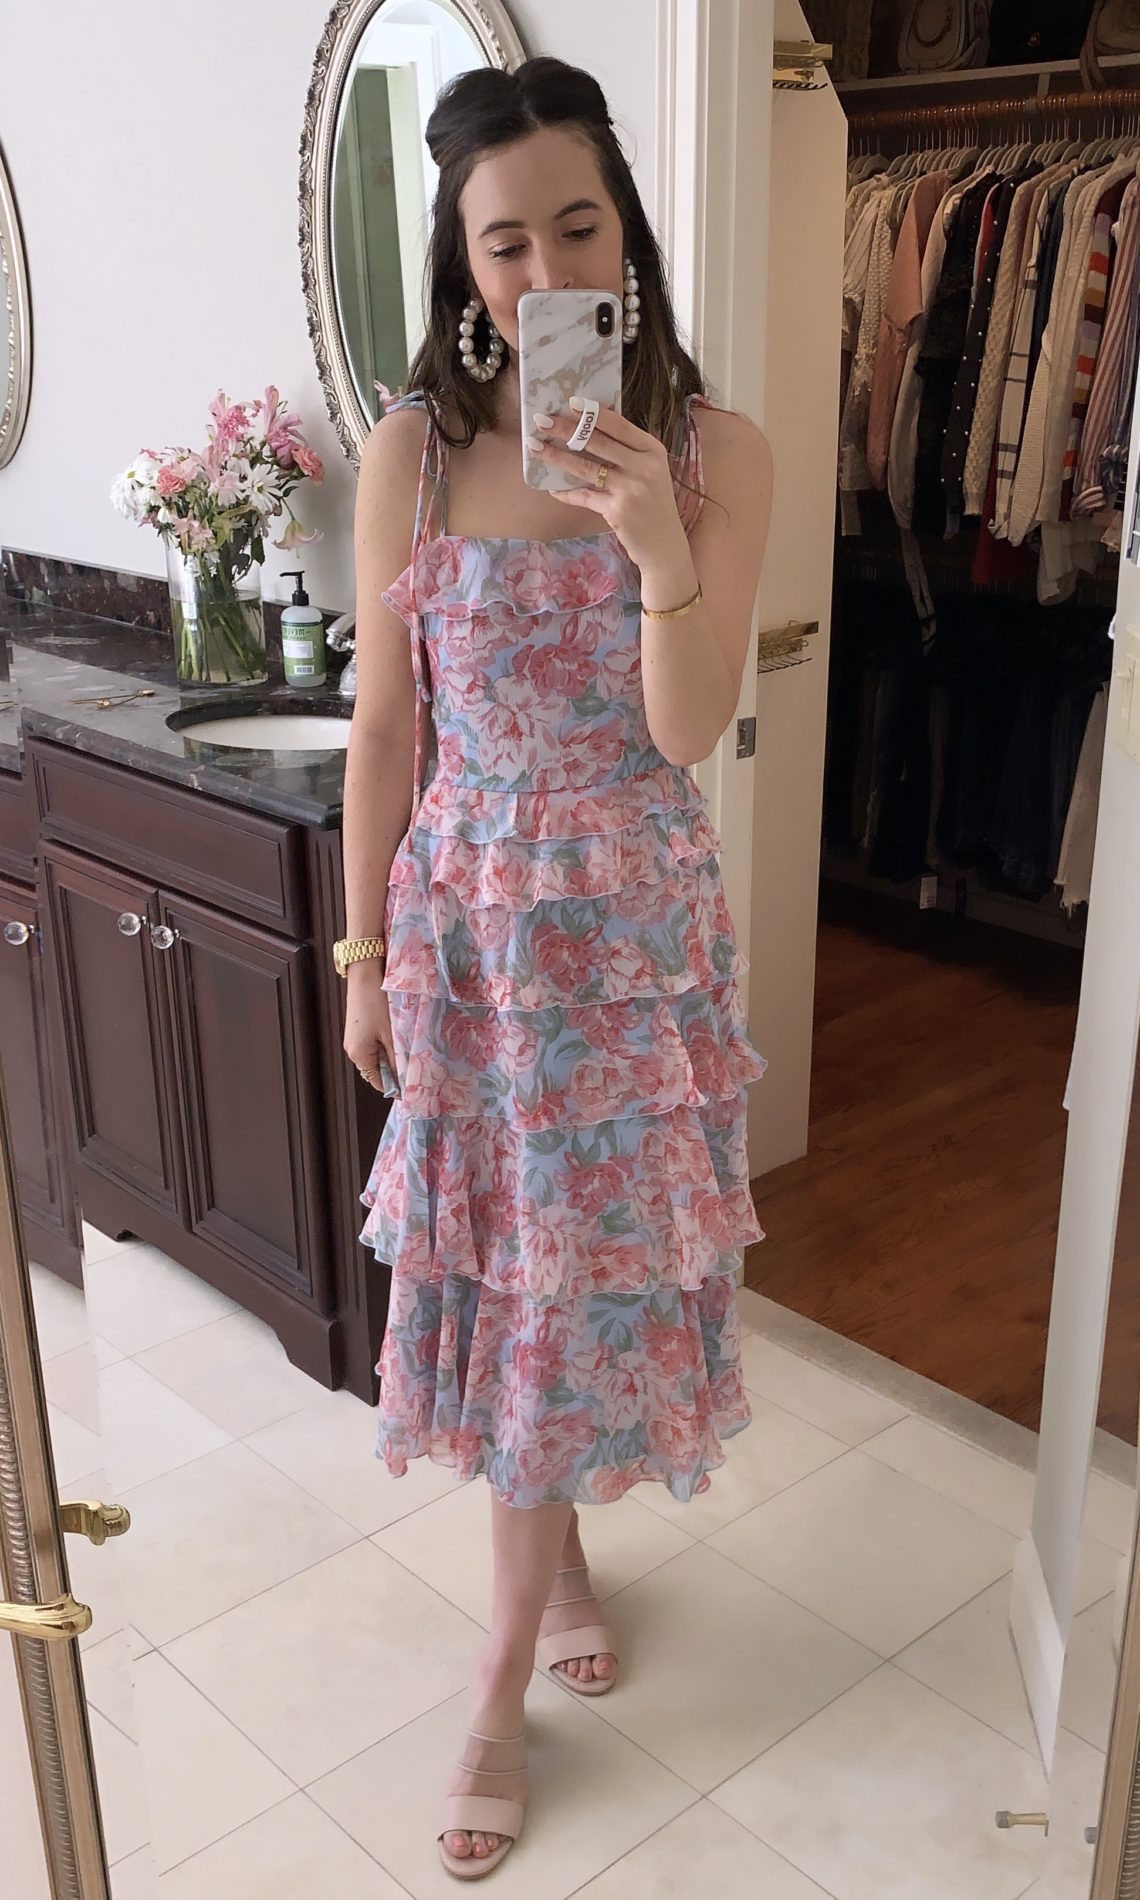 Spring Dress Try-On - Oh So Glam